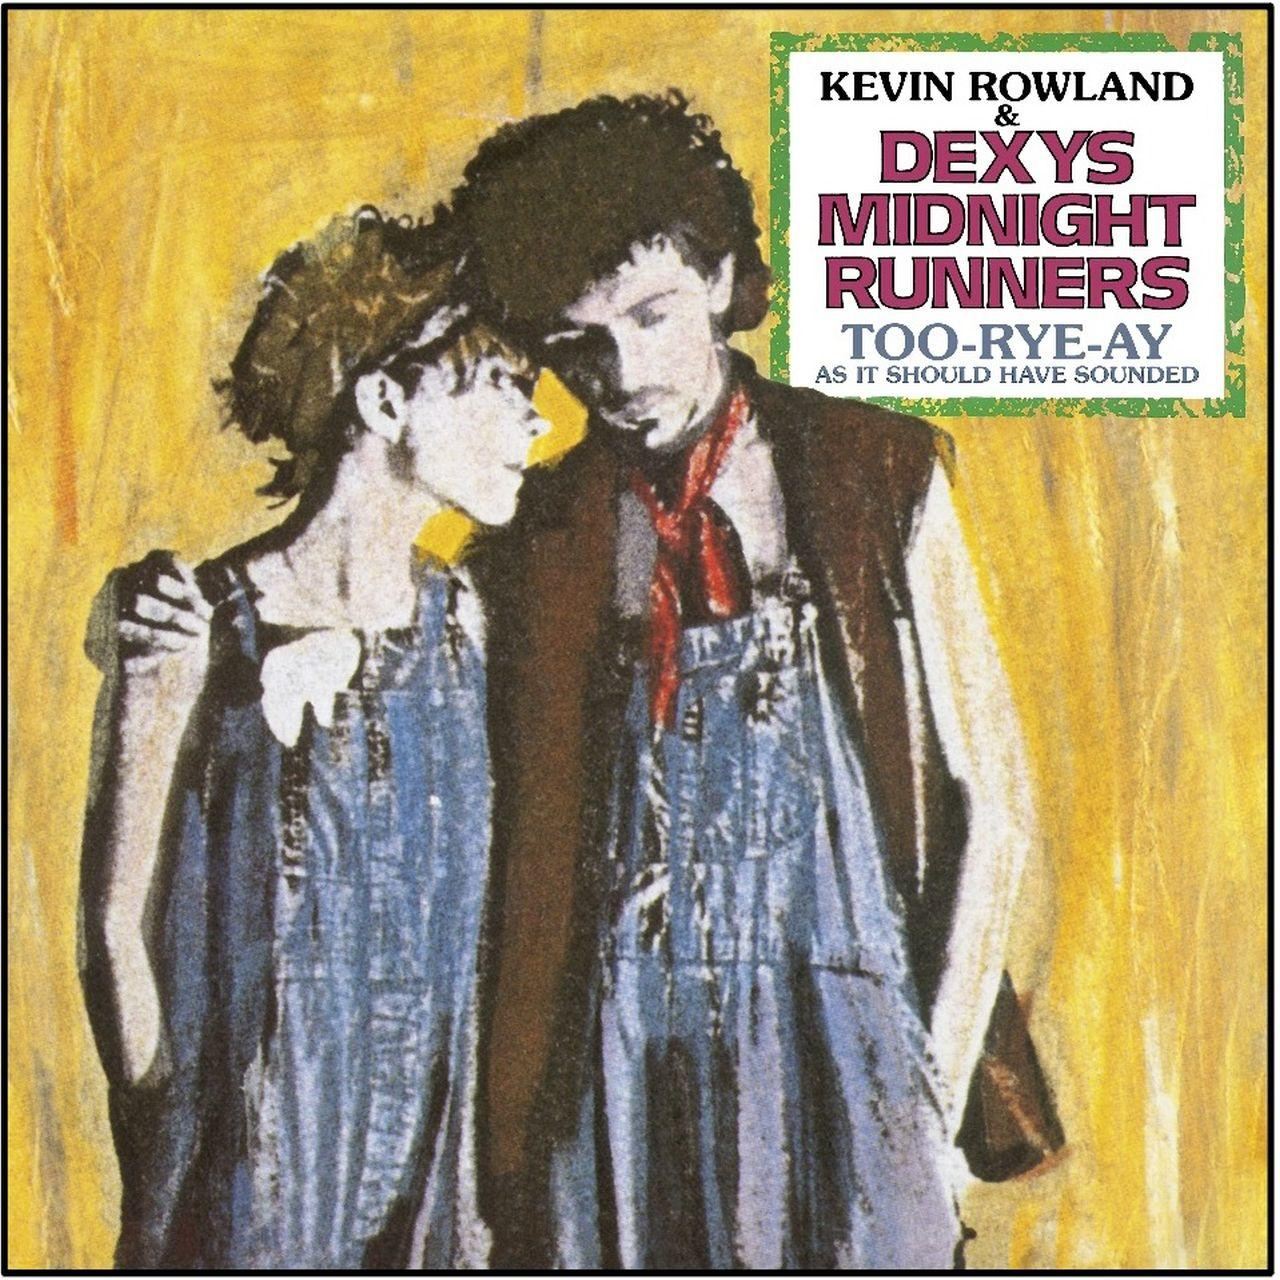 Midnight Have & Sounded - Dexy\'s (Deluxe Too-Rye-Ay, Runners Rowland (CD) Anniversary - (40th As It Should Kevin Edition) Remix)